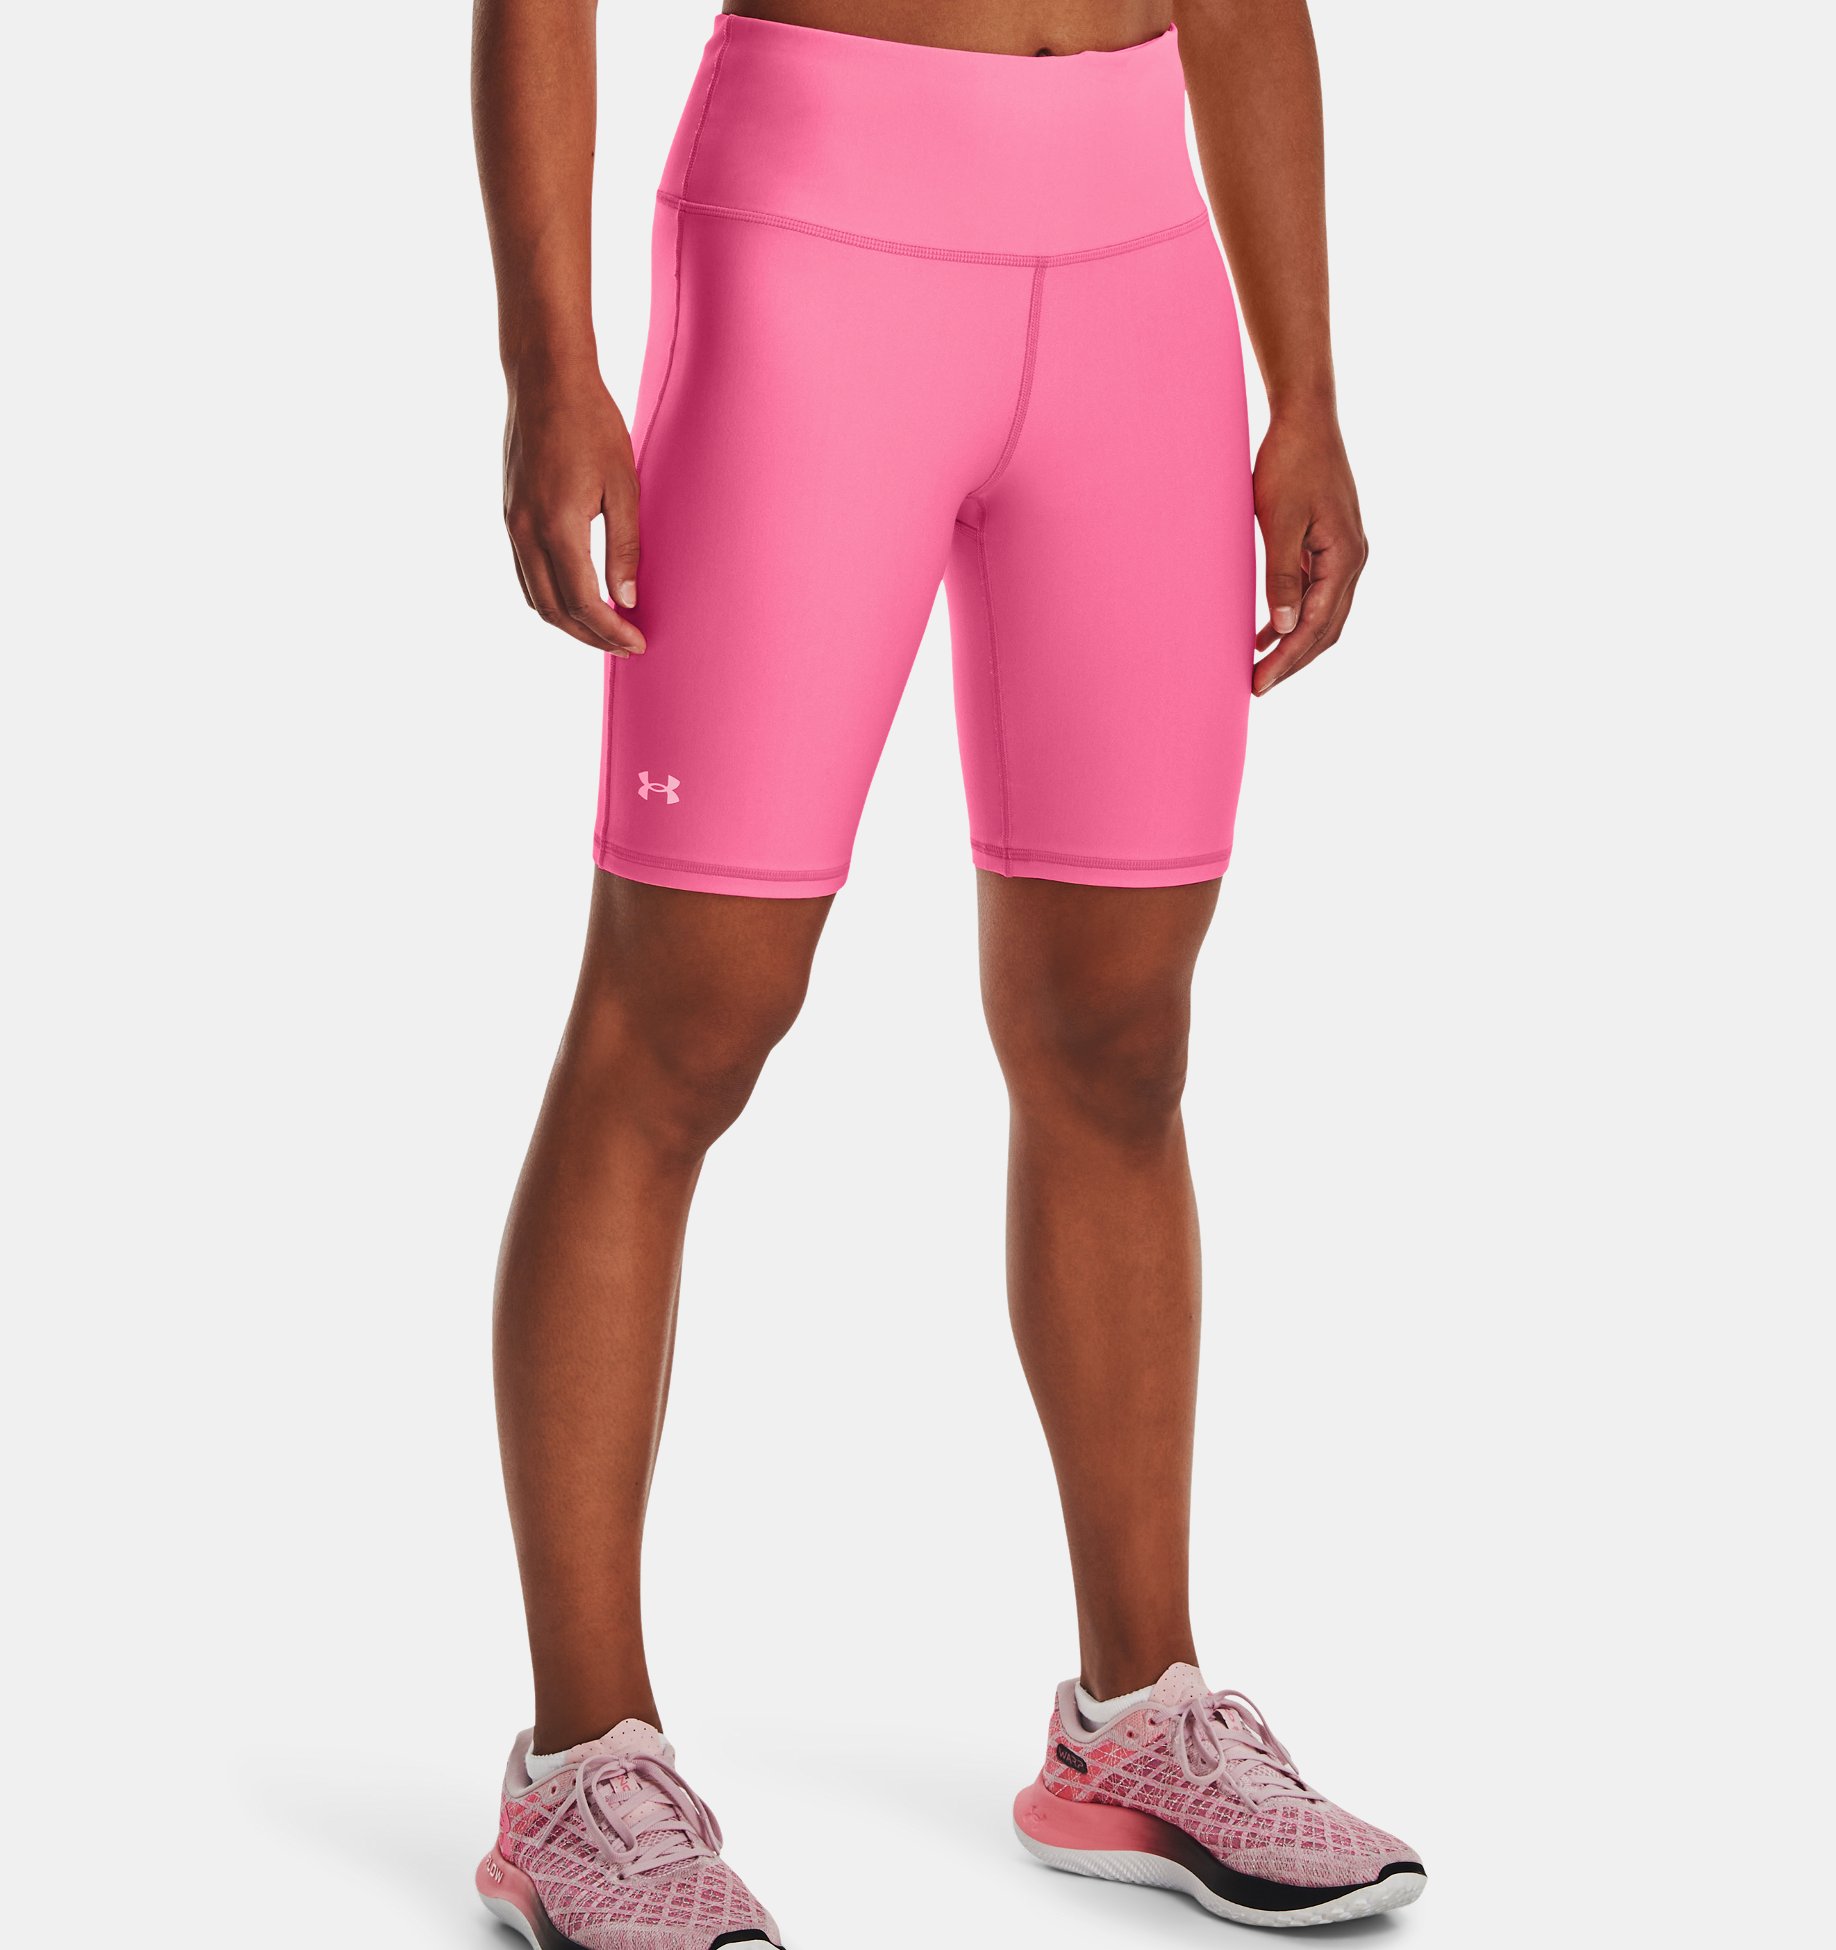 TheOpen Product Printed Fitted Shorts in Pink Womens Clothing Shorts Knee-length shorts and long shorts 